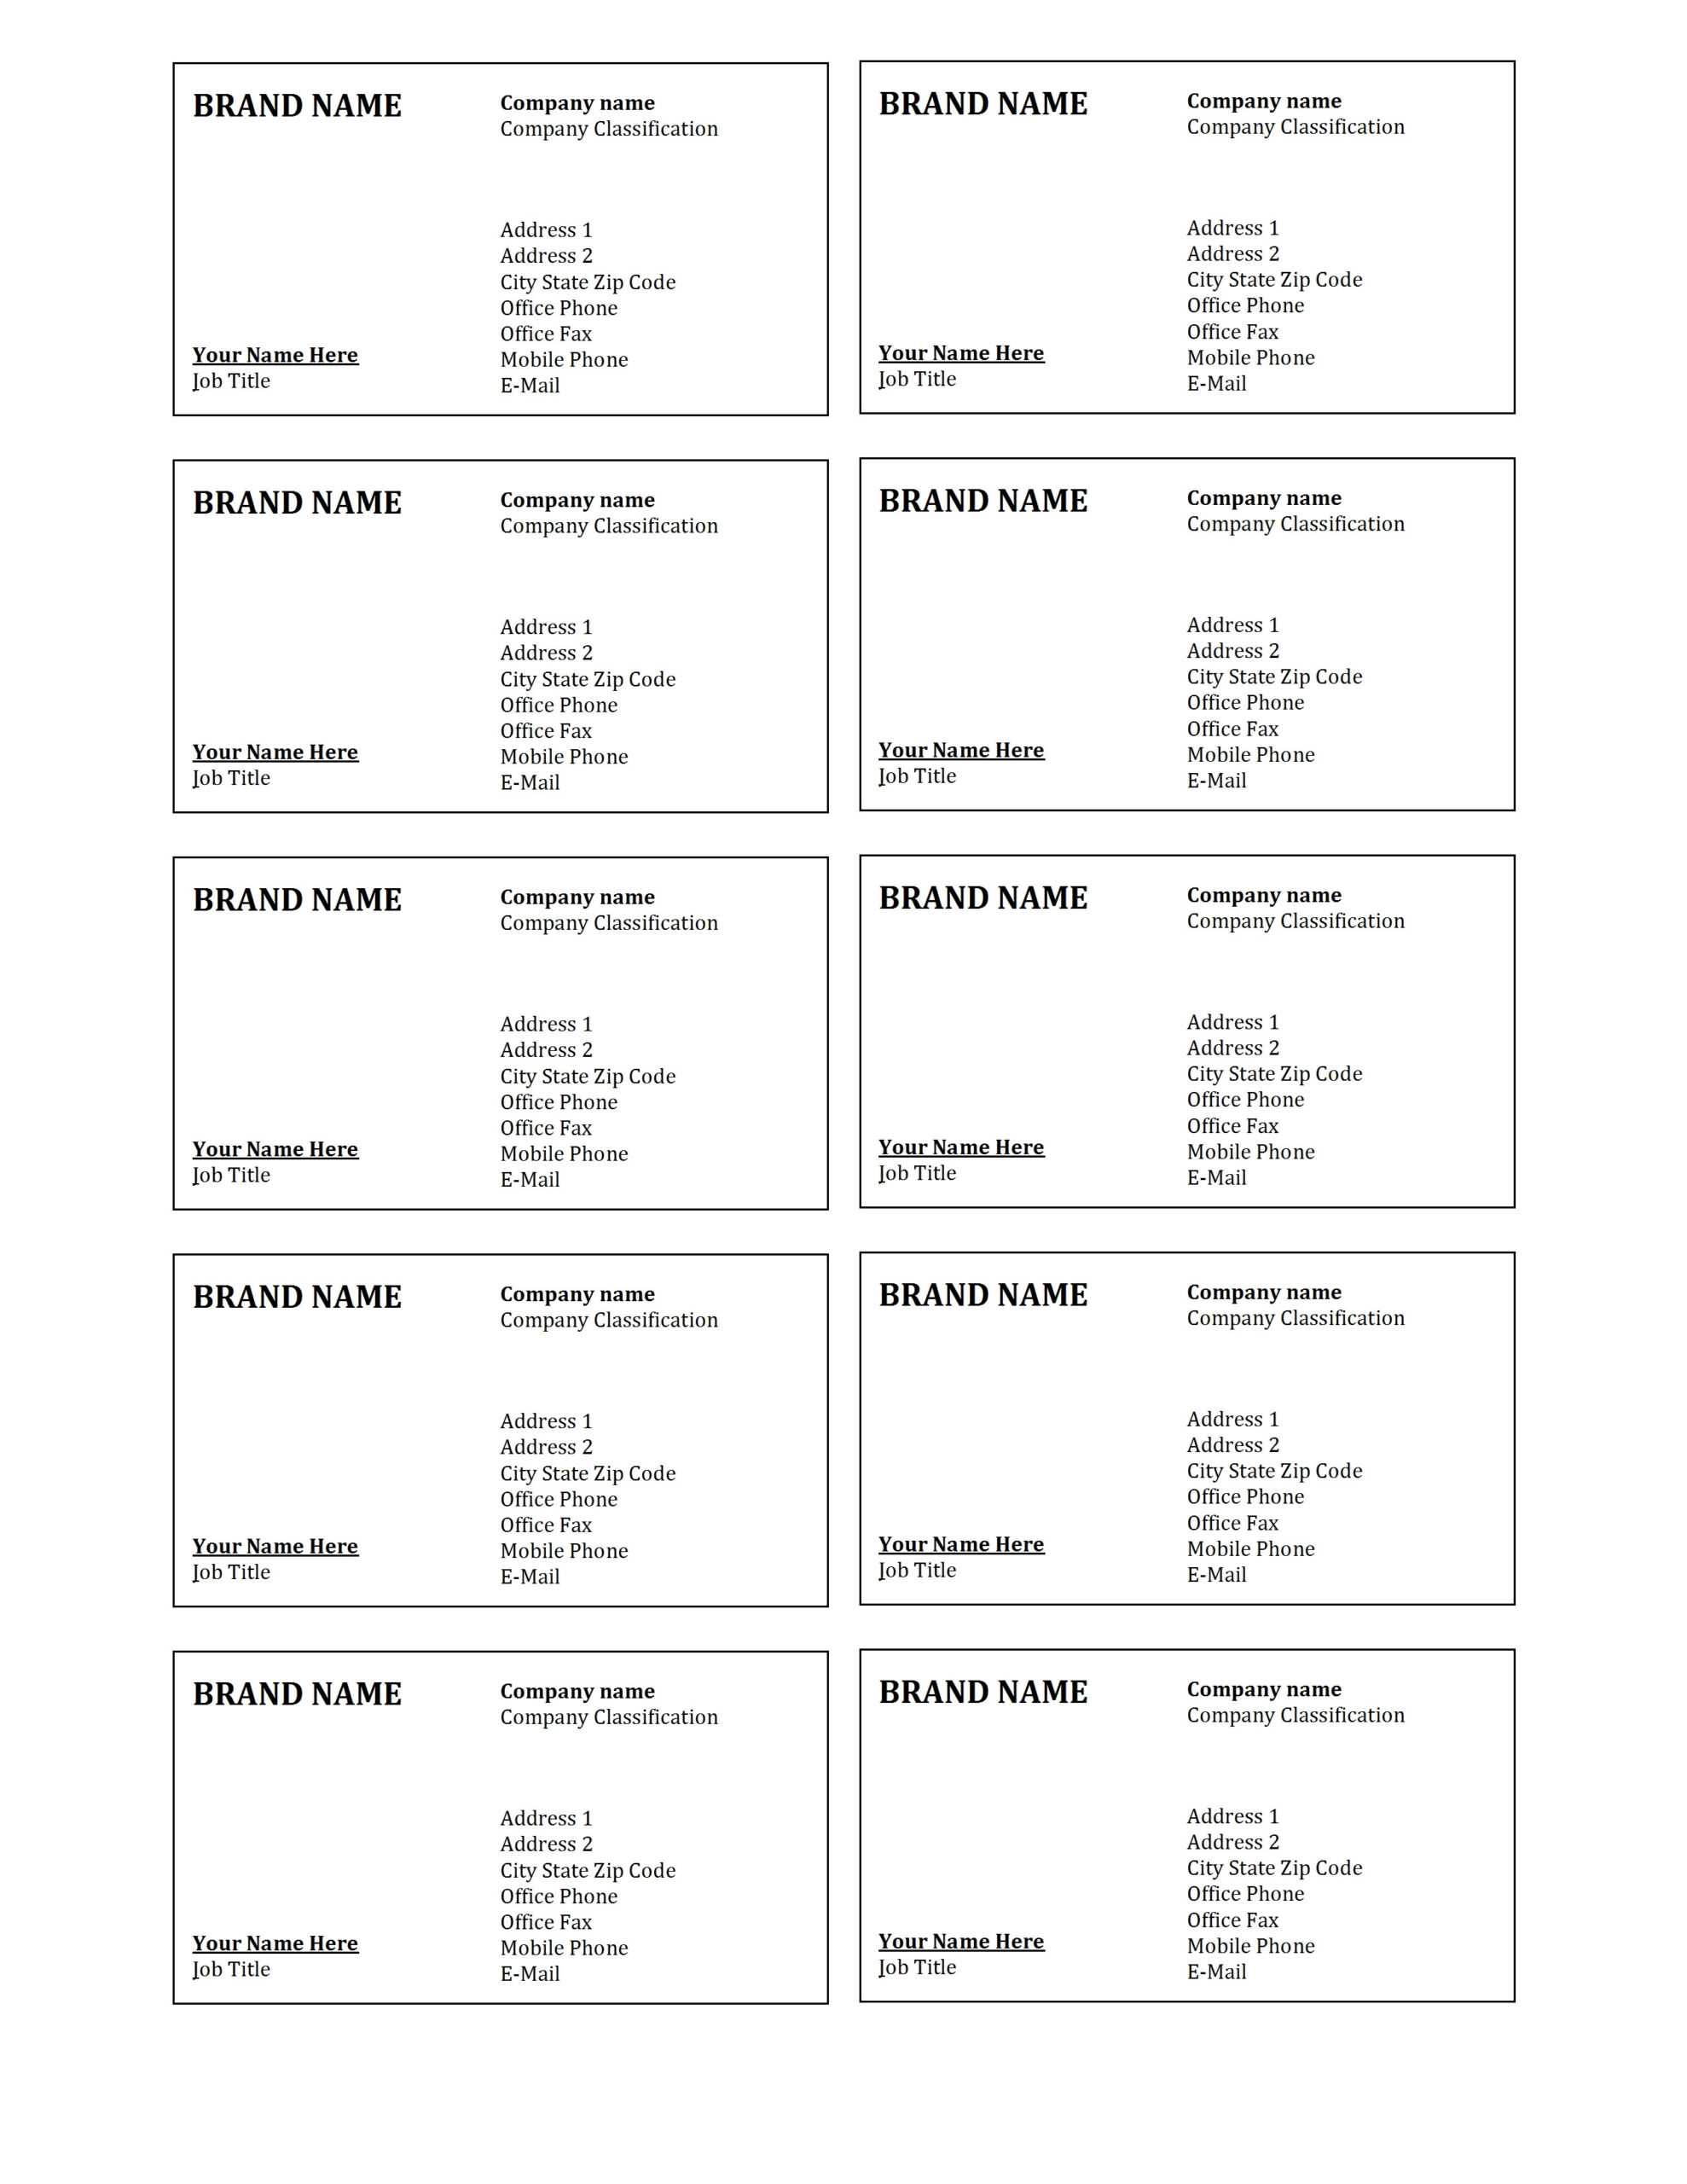 9 Visiting Card Sheet Templates | Fax Cover Sheet Examples With Regard To Blank Business Card Template For Word